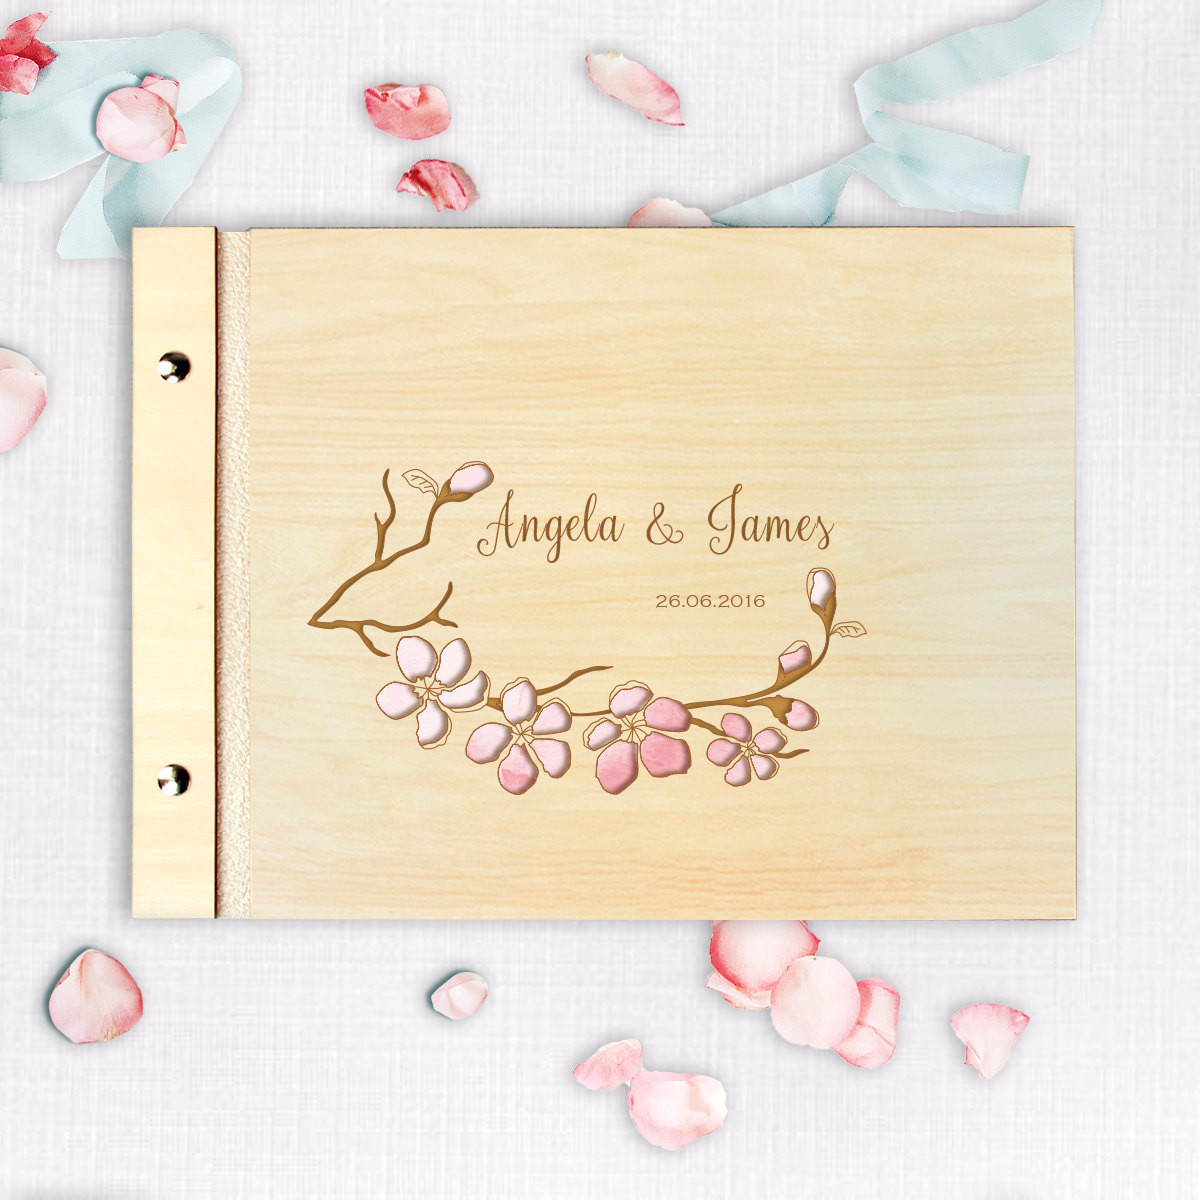 Rustic Wedding Guest Book Uk
 Wooden Wedding Guest Book Rustic Guestbook Cherry Blossom